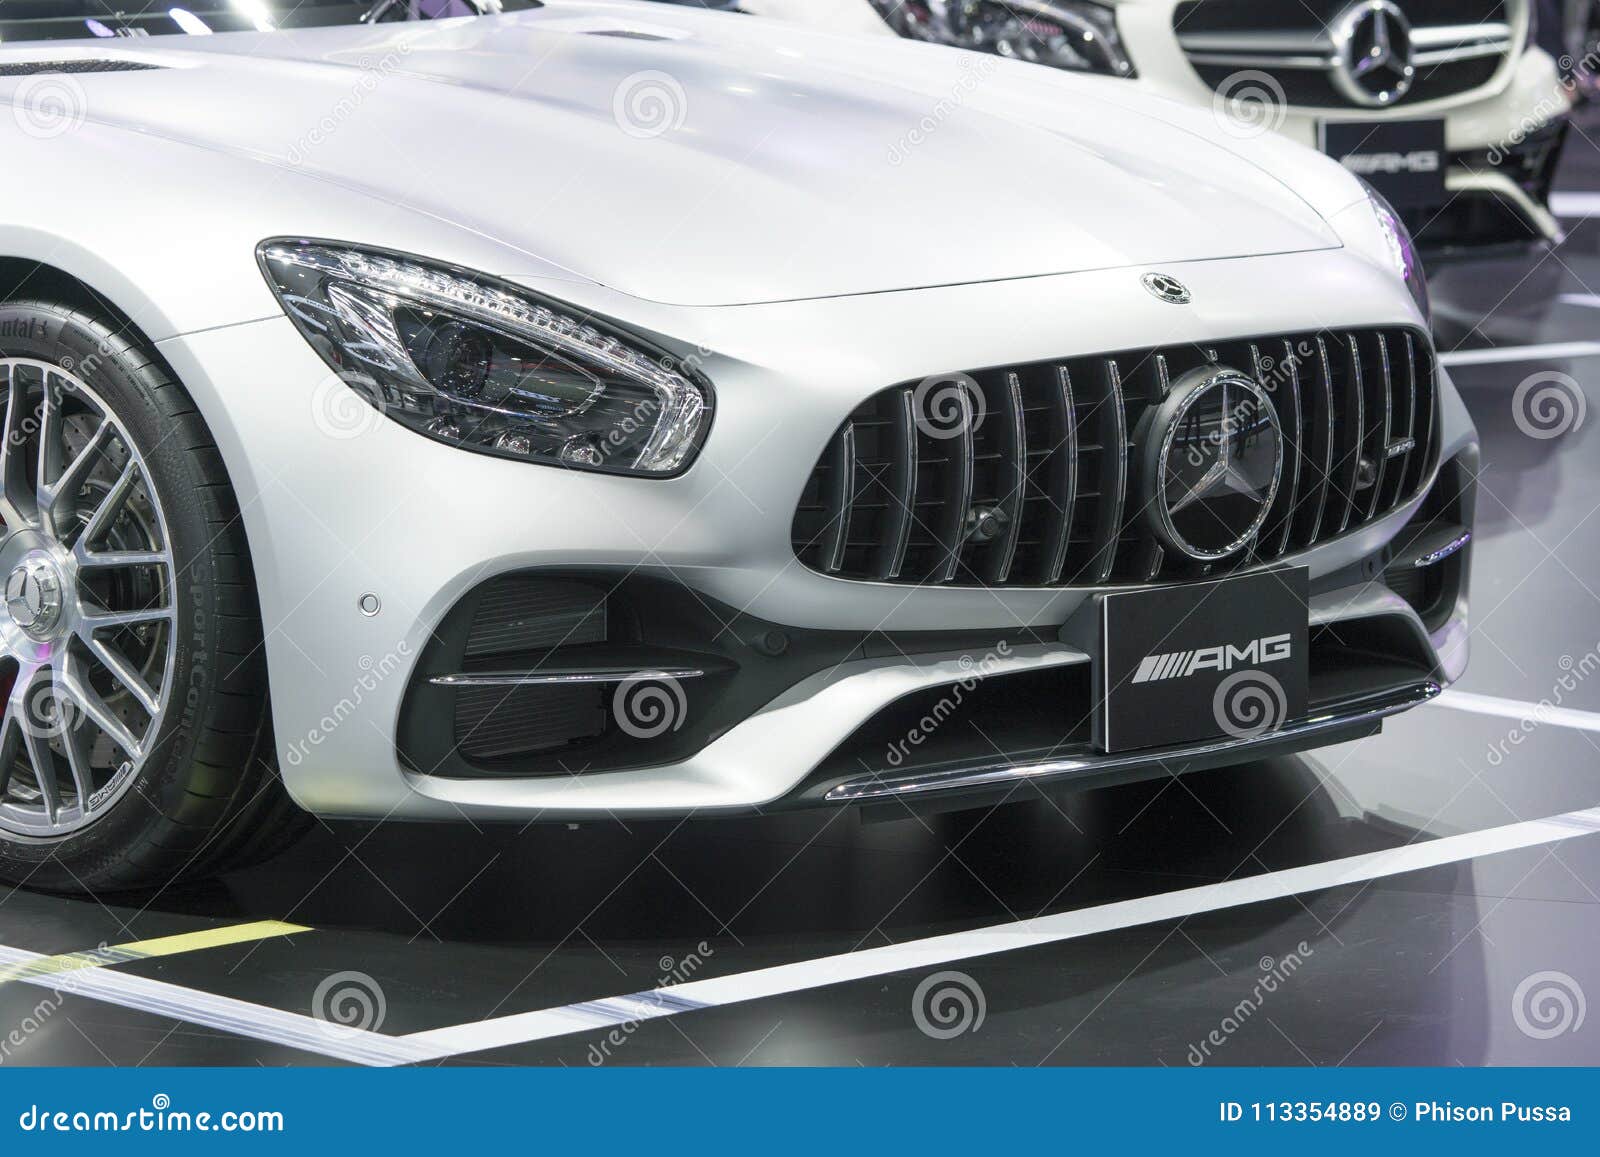 Mercedes Benz Car On Display At Motor Show Editorial Stock